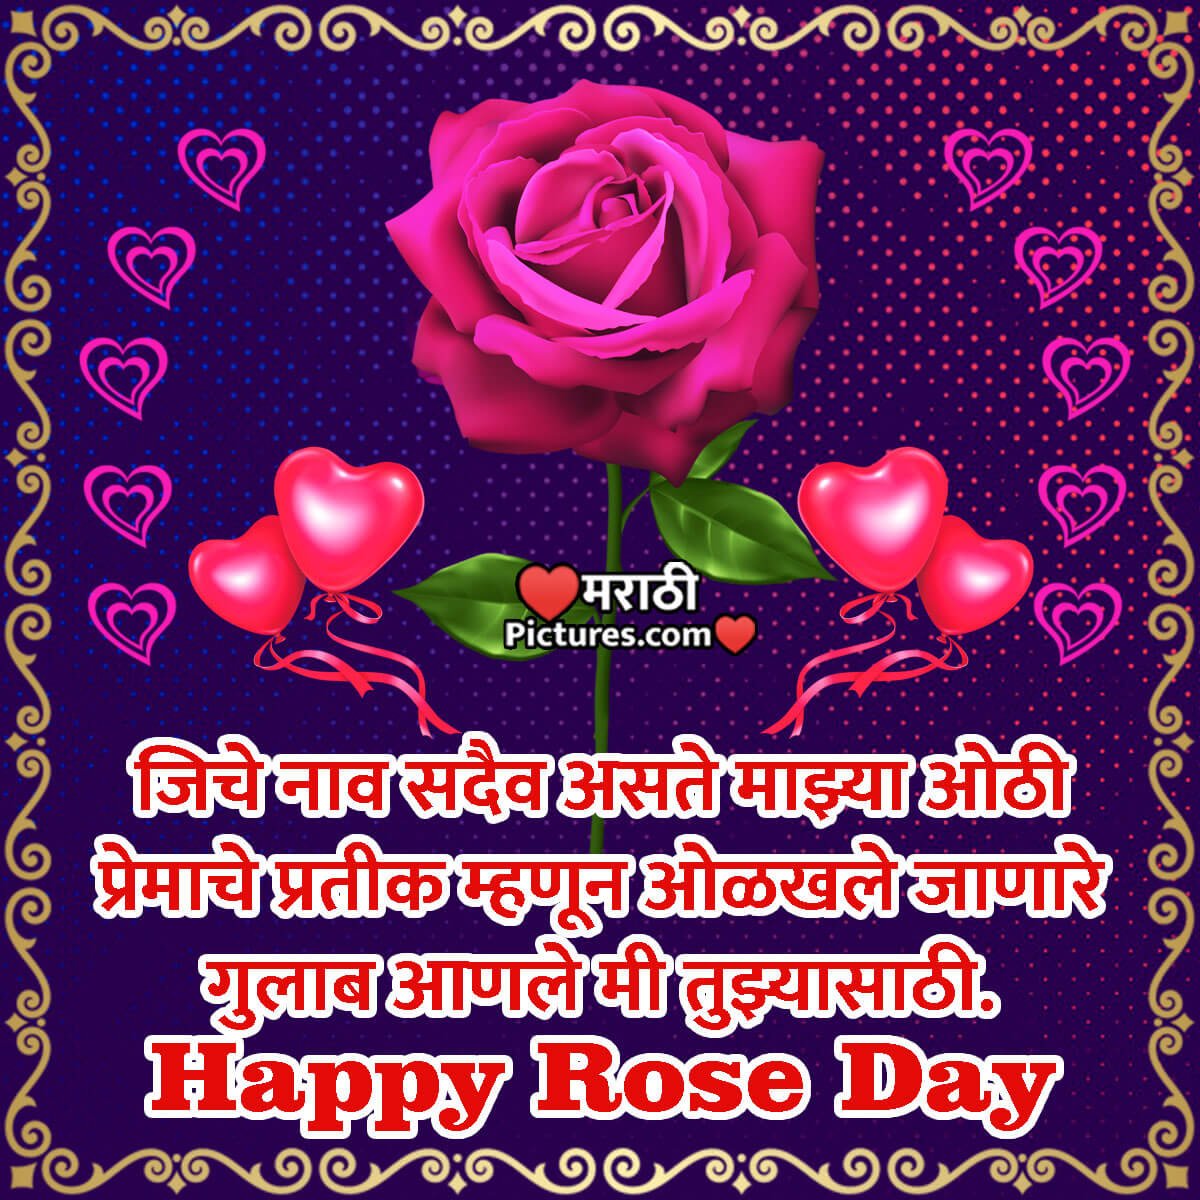 Happy Rose Day Message - MarathiPictures.com